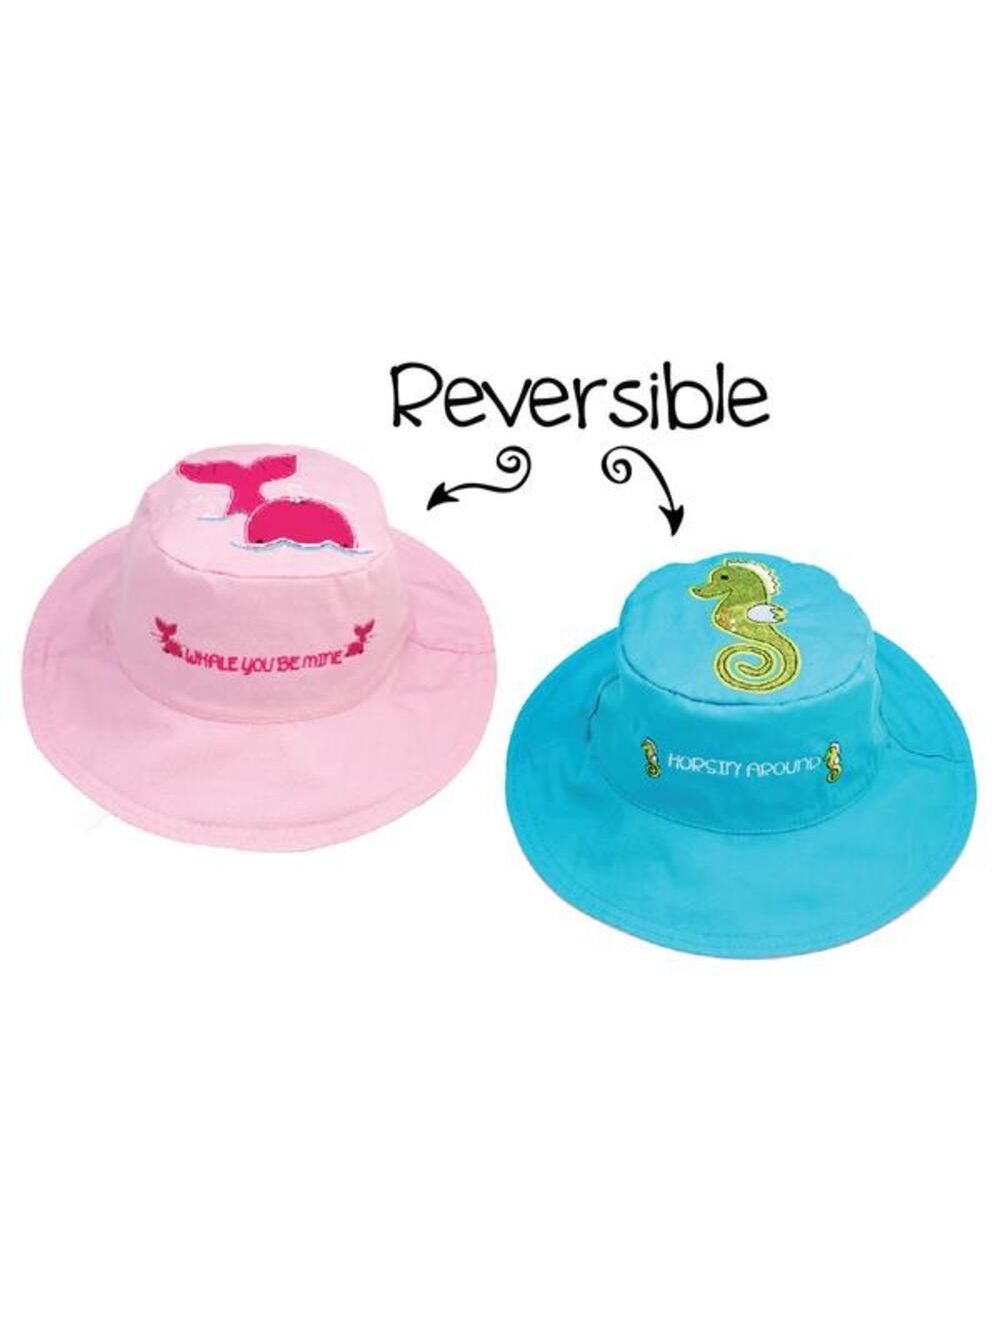 Reversible Baby and Kids Sun Hat